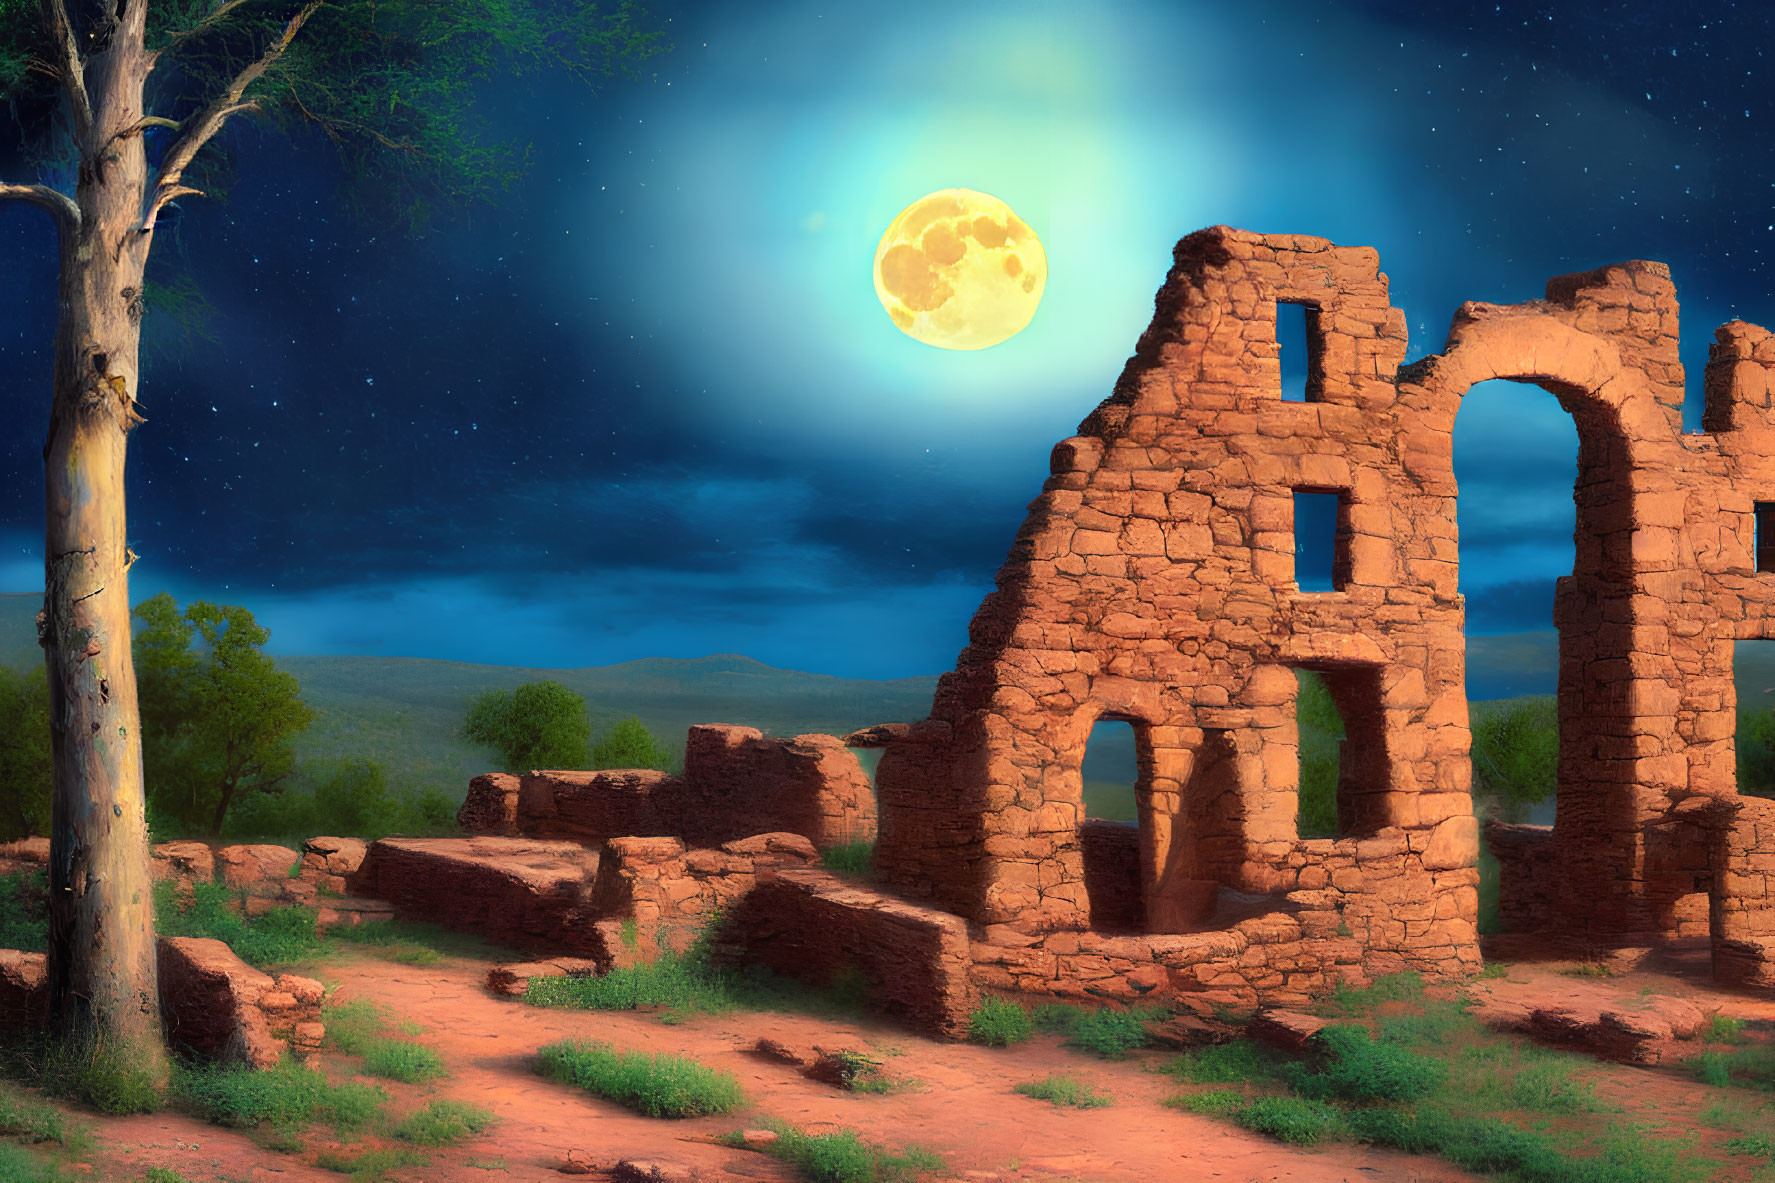 Moonlit ancient ruins in tranquil night landscape